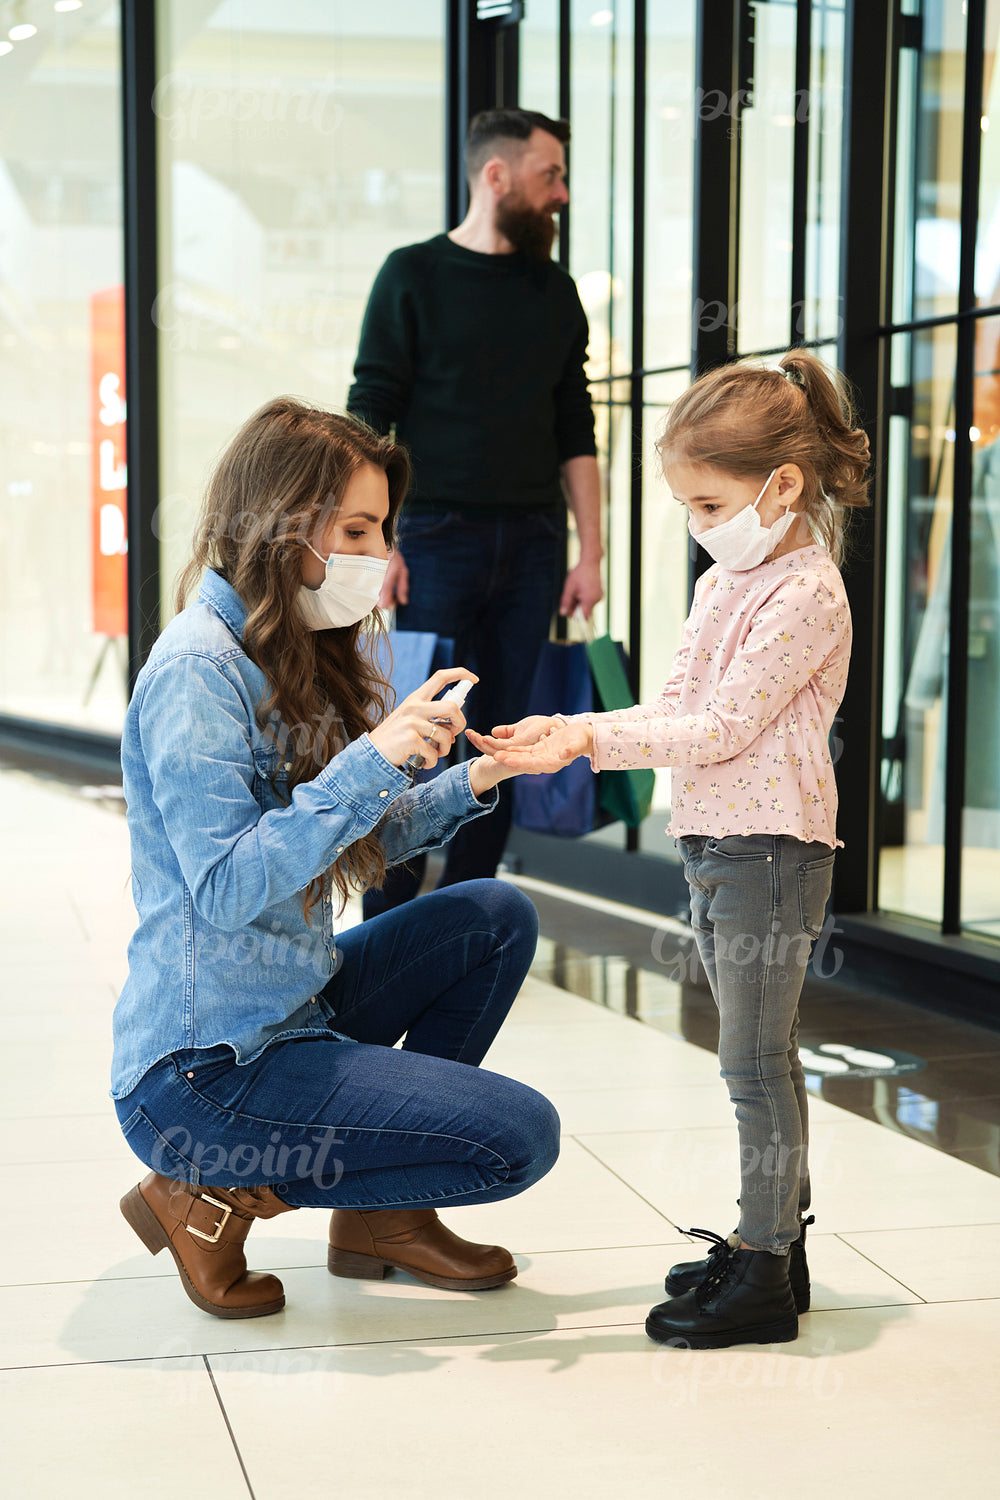 Mom disinfects her daughter's hands while shopping at the mall